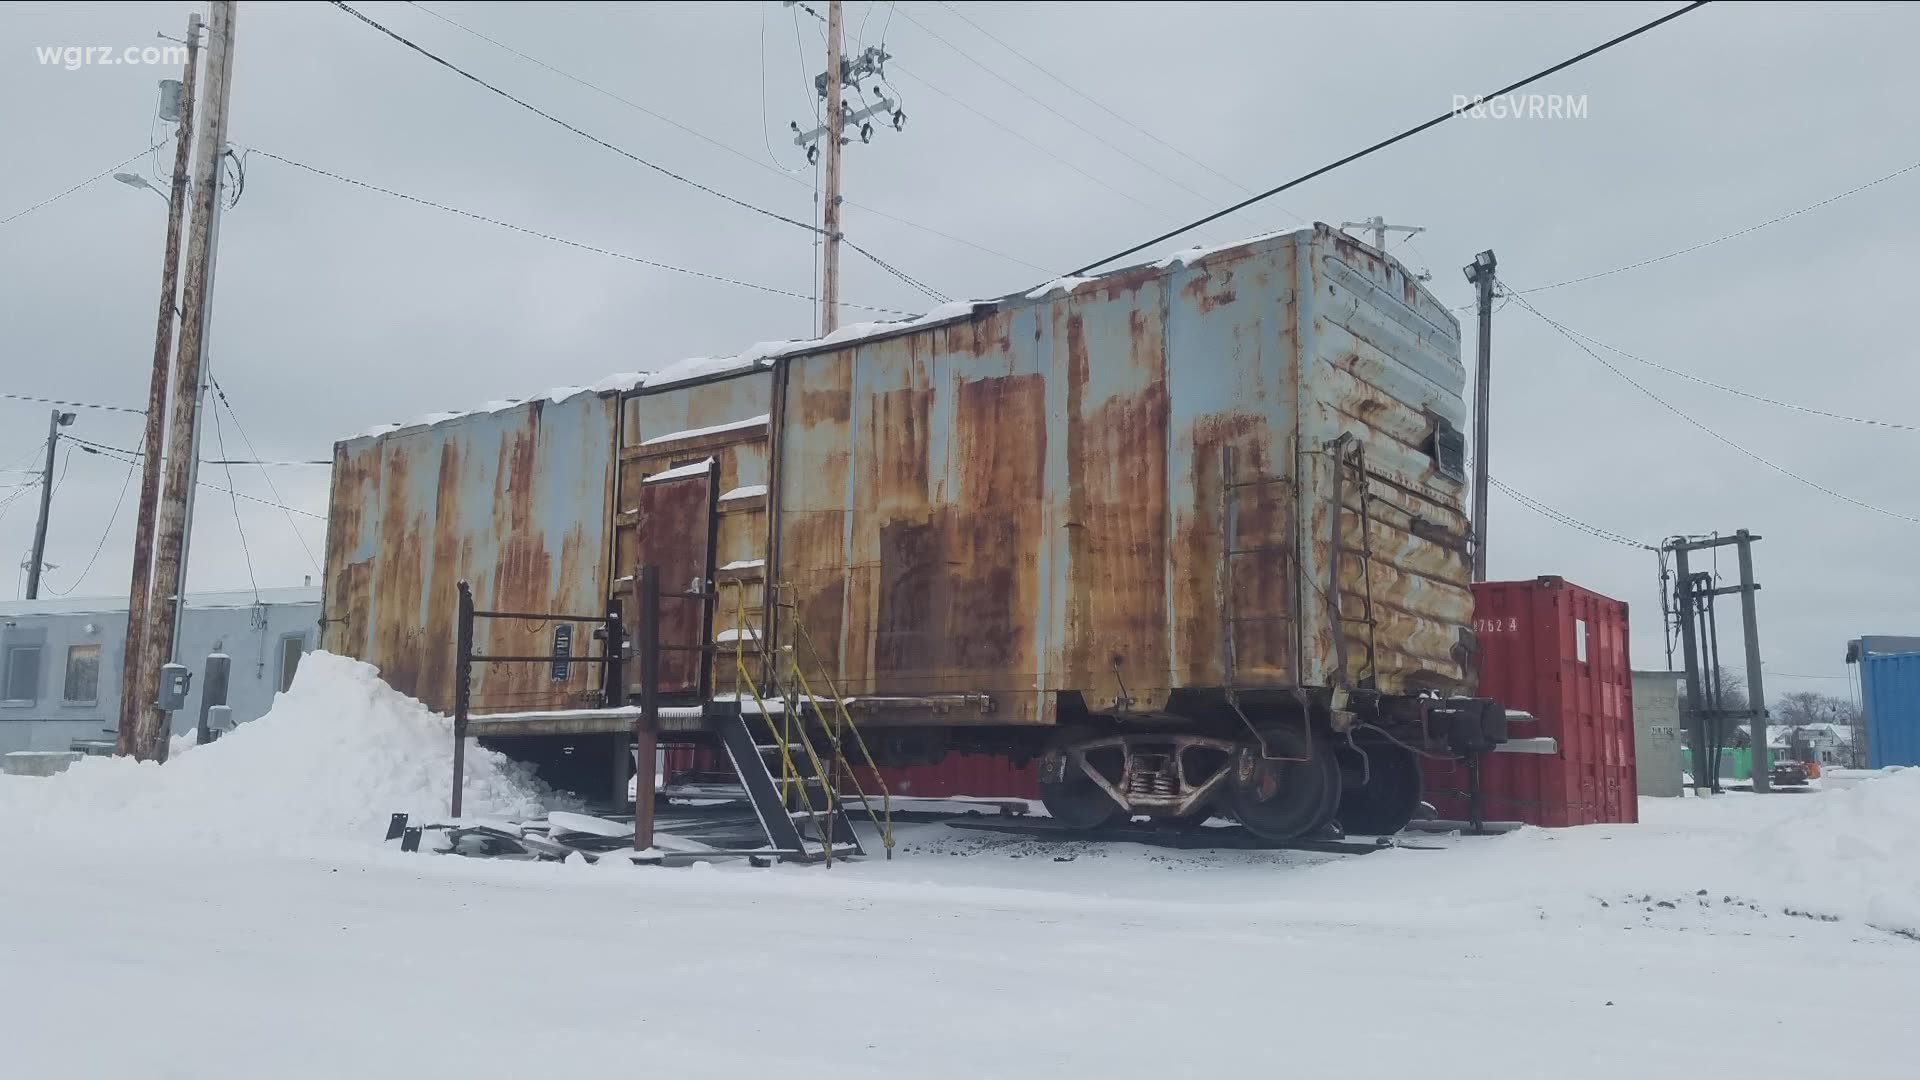 Boxcar coming to Silo City by way of Flour By Rail Legacy Project